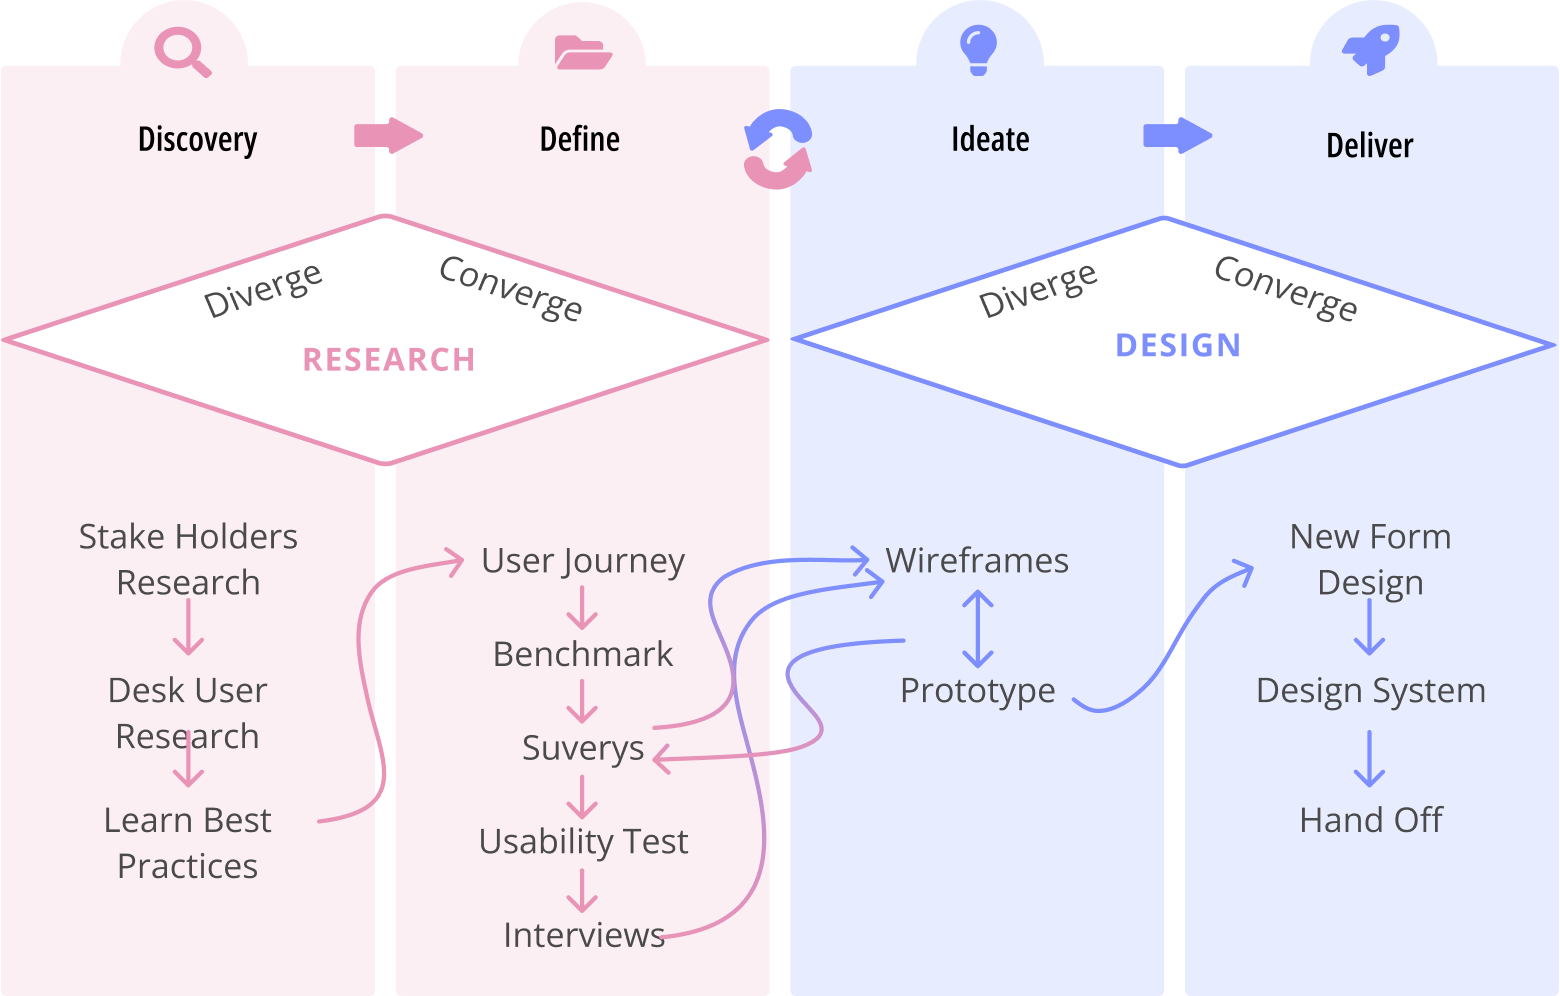 design process from discovery to define to ideate to delivery